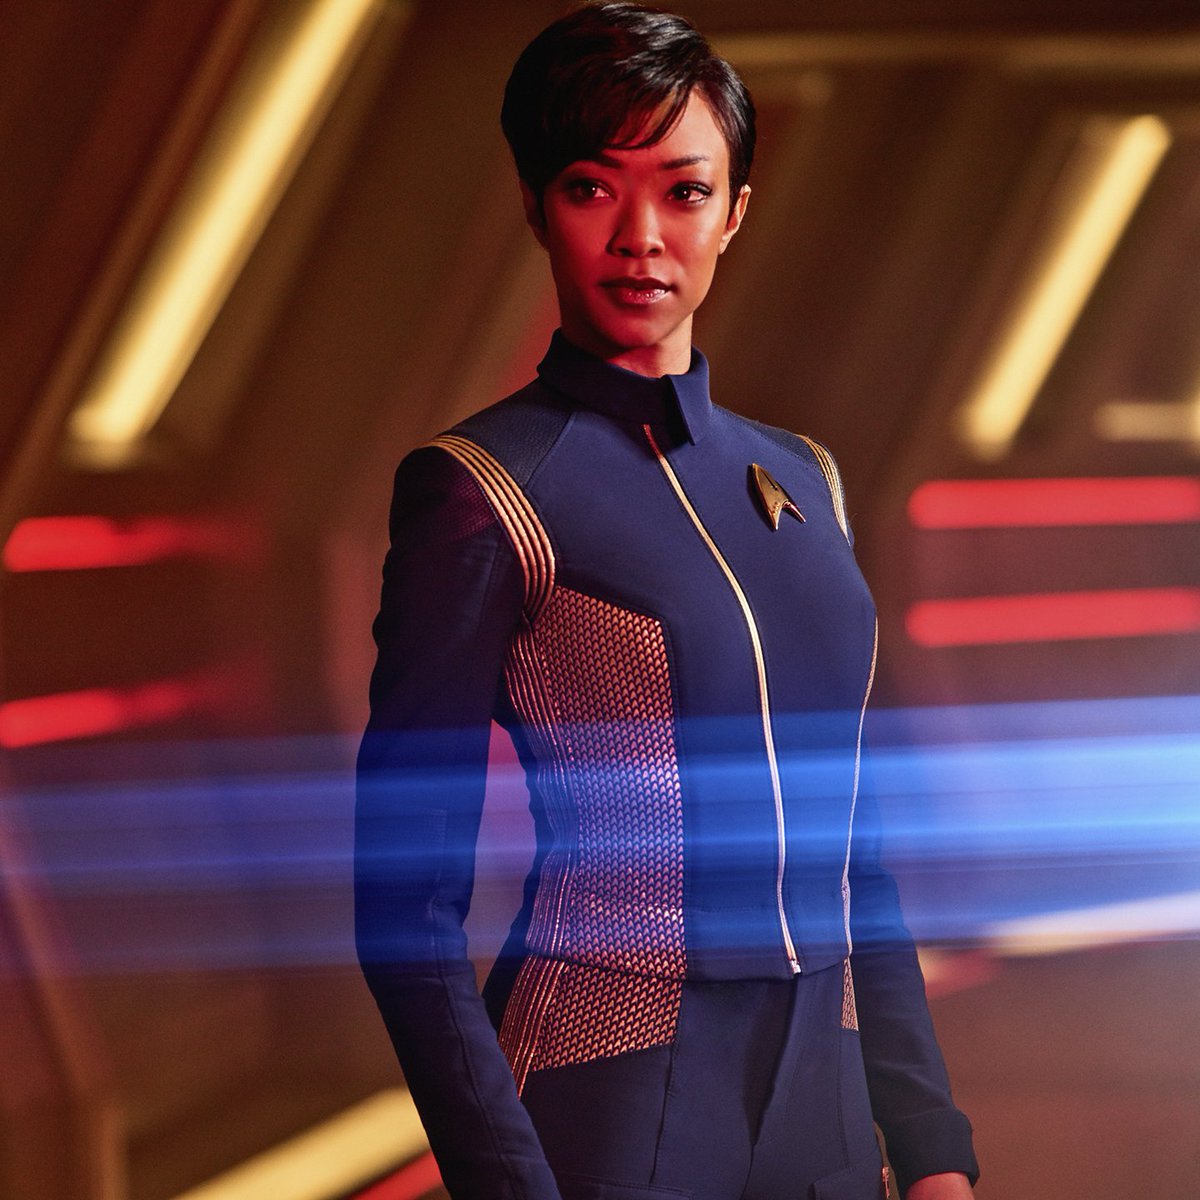 2017 feels like 900 years ago, but we'll never forget it. Happy Disco Day, celebrating the original premiere of #StarTrekDiscovery! What are your favorite episodes?